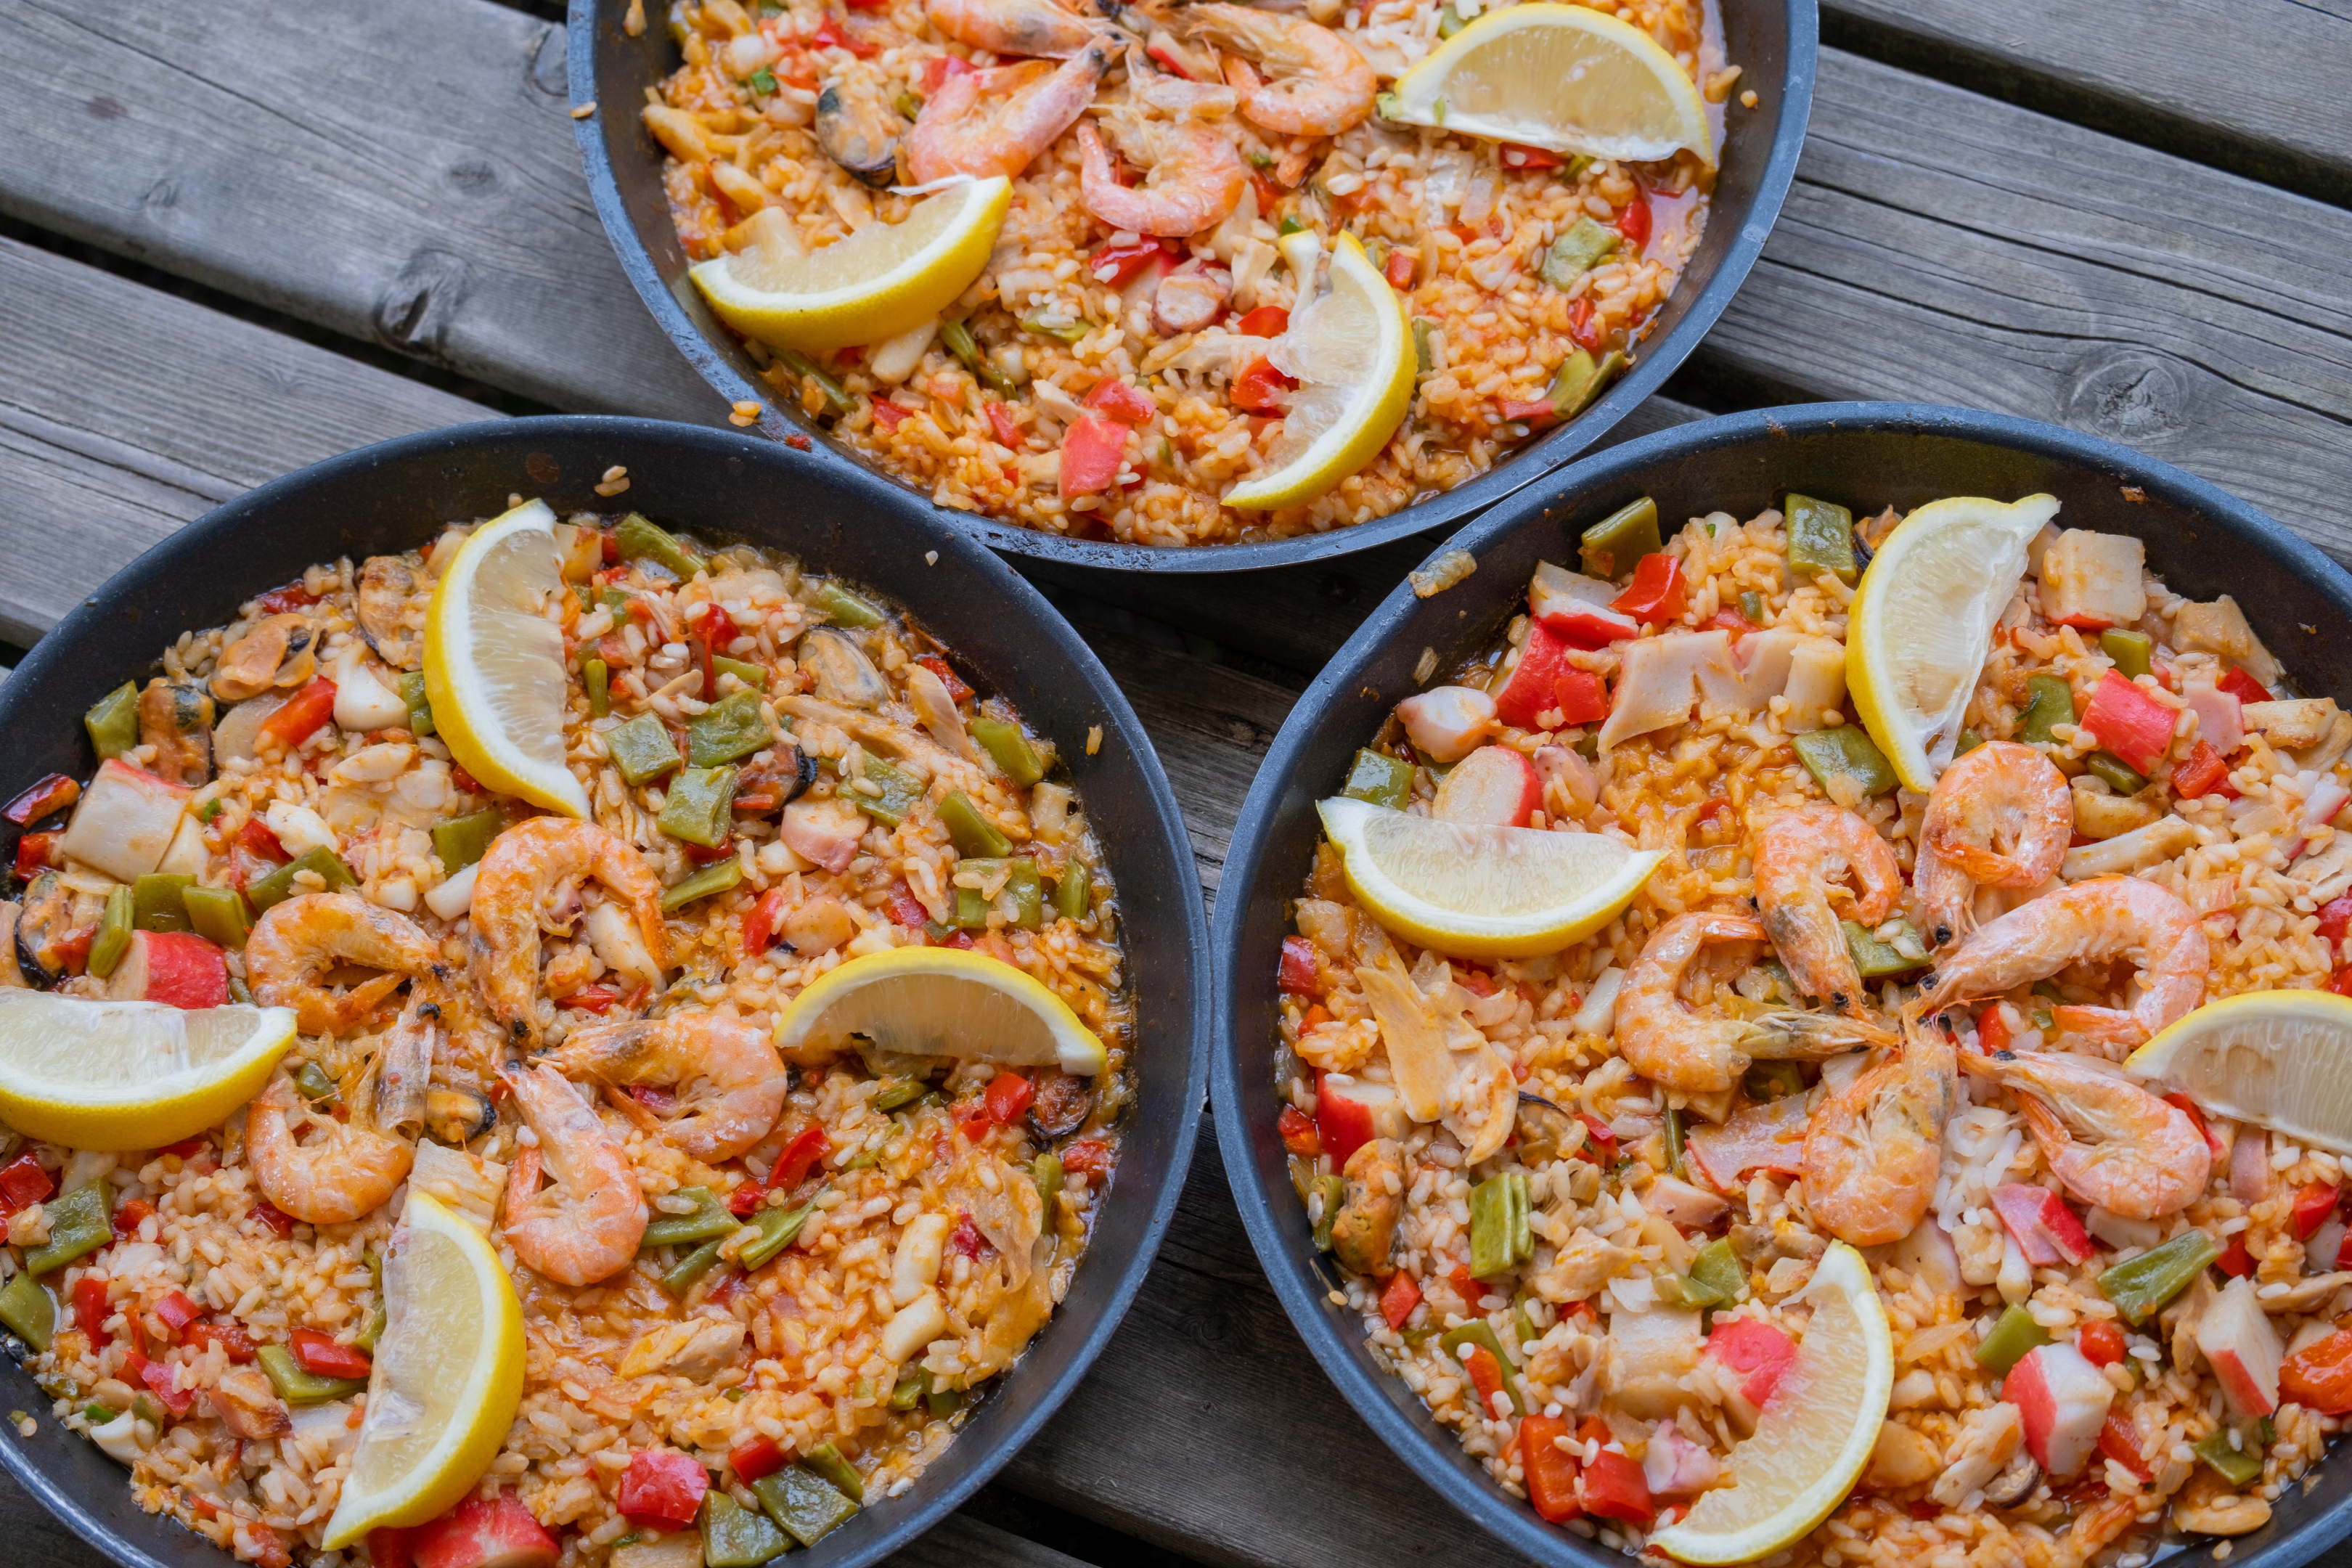 Image source: https://www.pexels.com/photo/3-plates-of-paella-the-food-of-the-spanish-kitchen-13207675/   Caption: 3 plates of paella